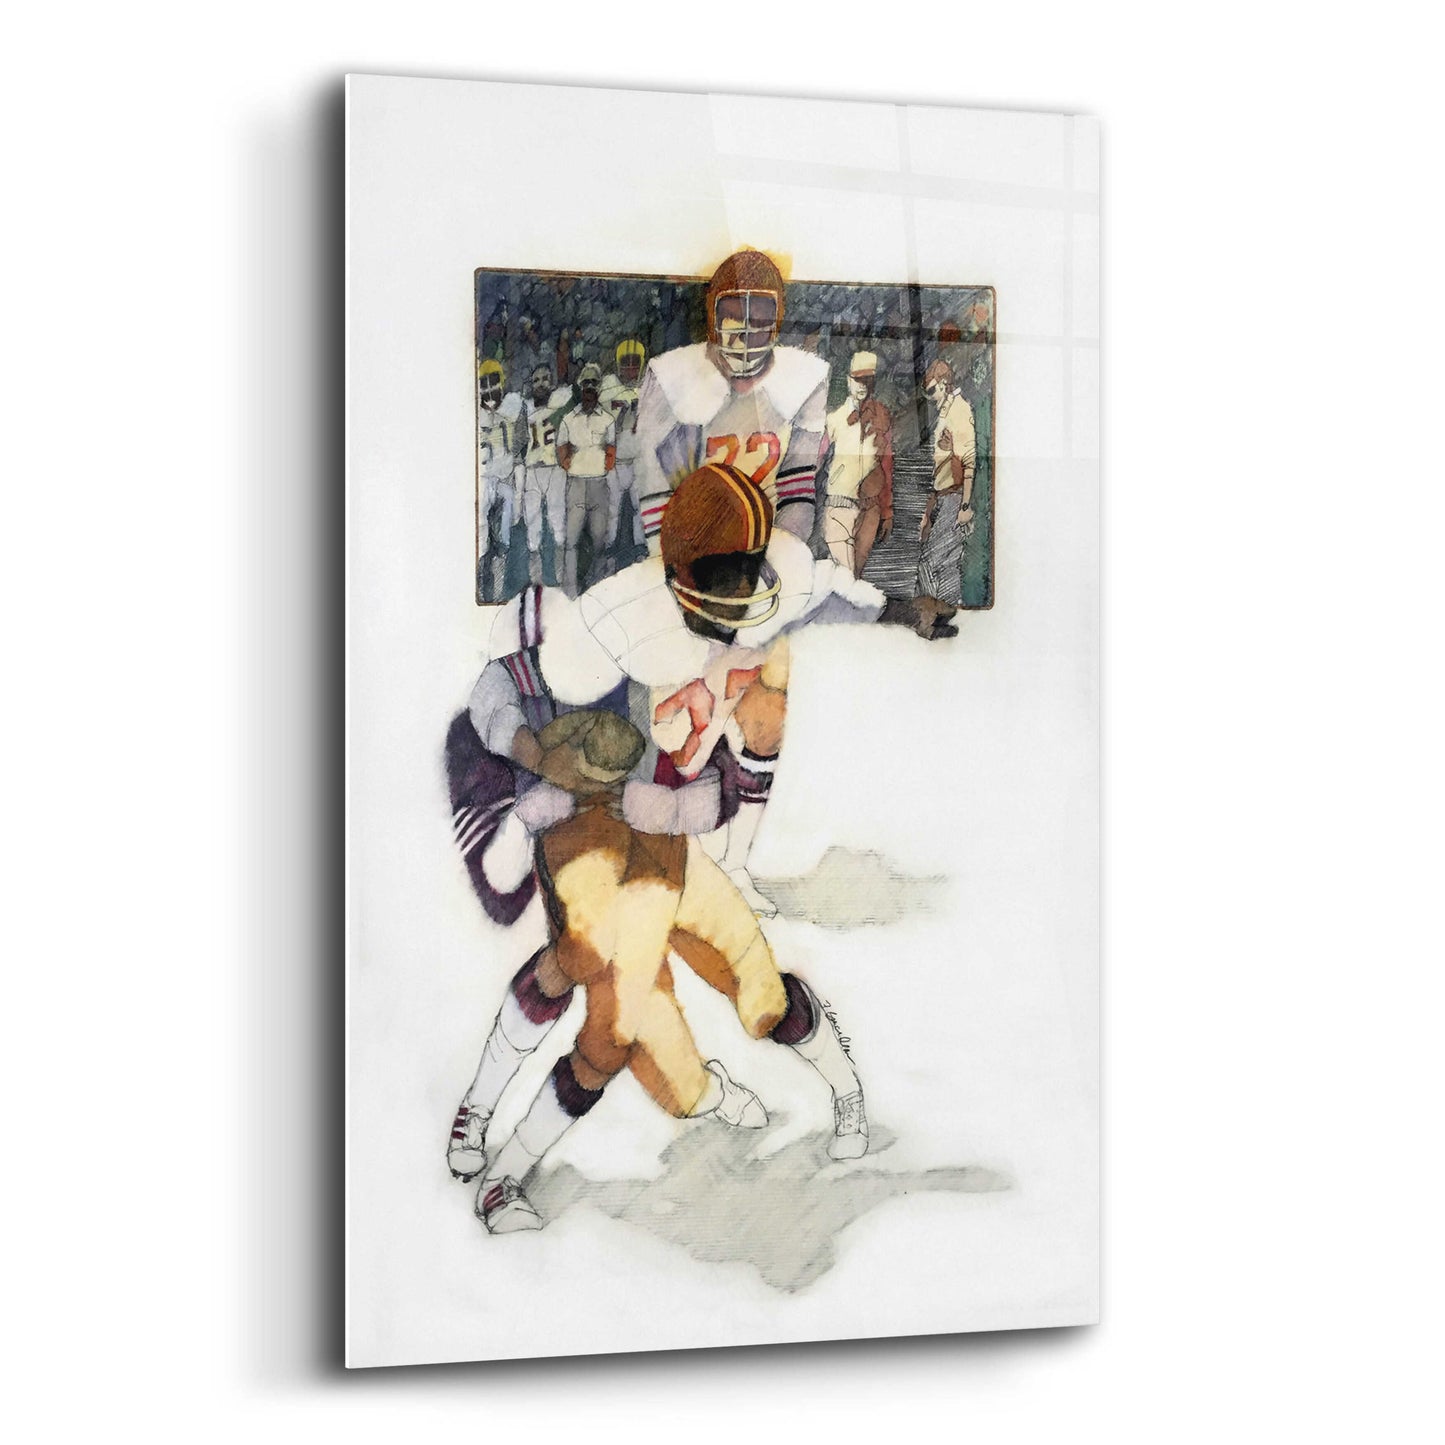 Epic Art 'The Tackle' by Bruce Dean, Acrylic Glass Wall Art,12x16